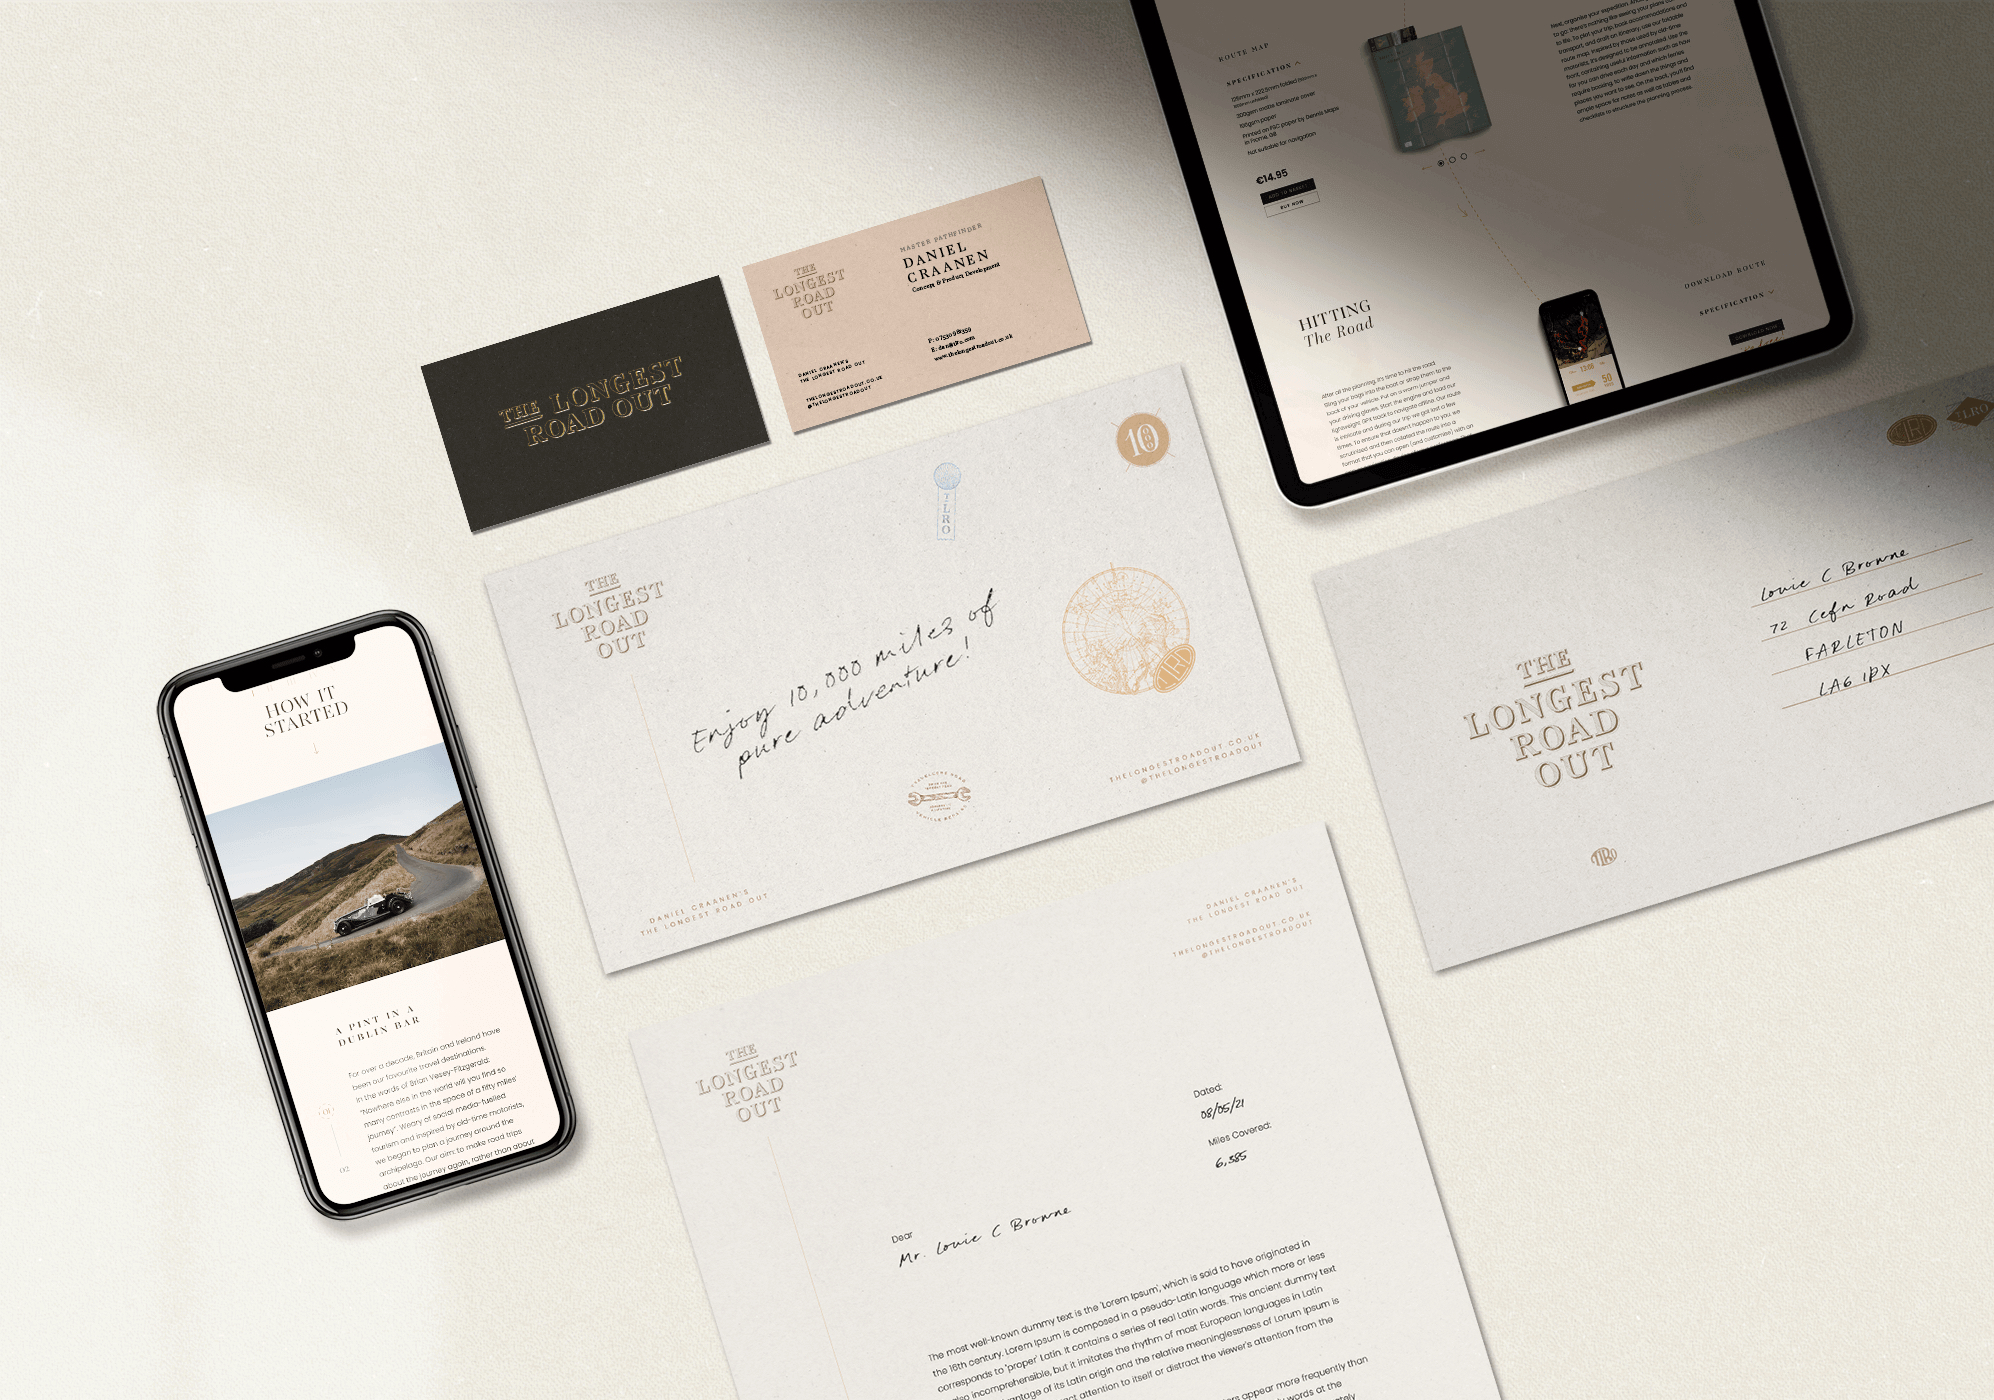 The Longest Road Out Mockups